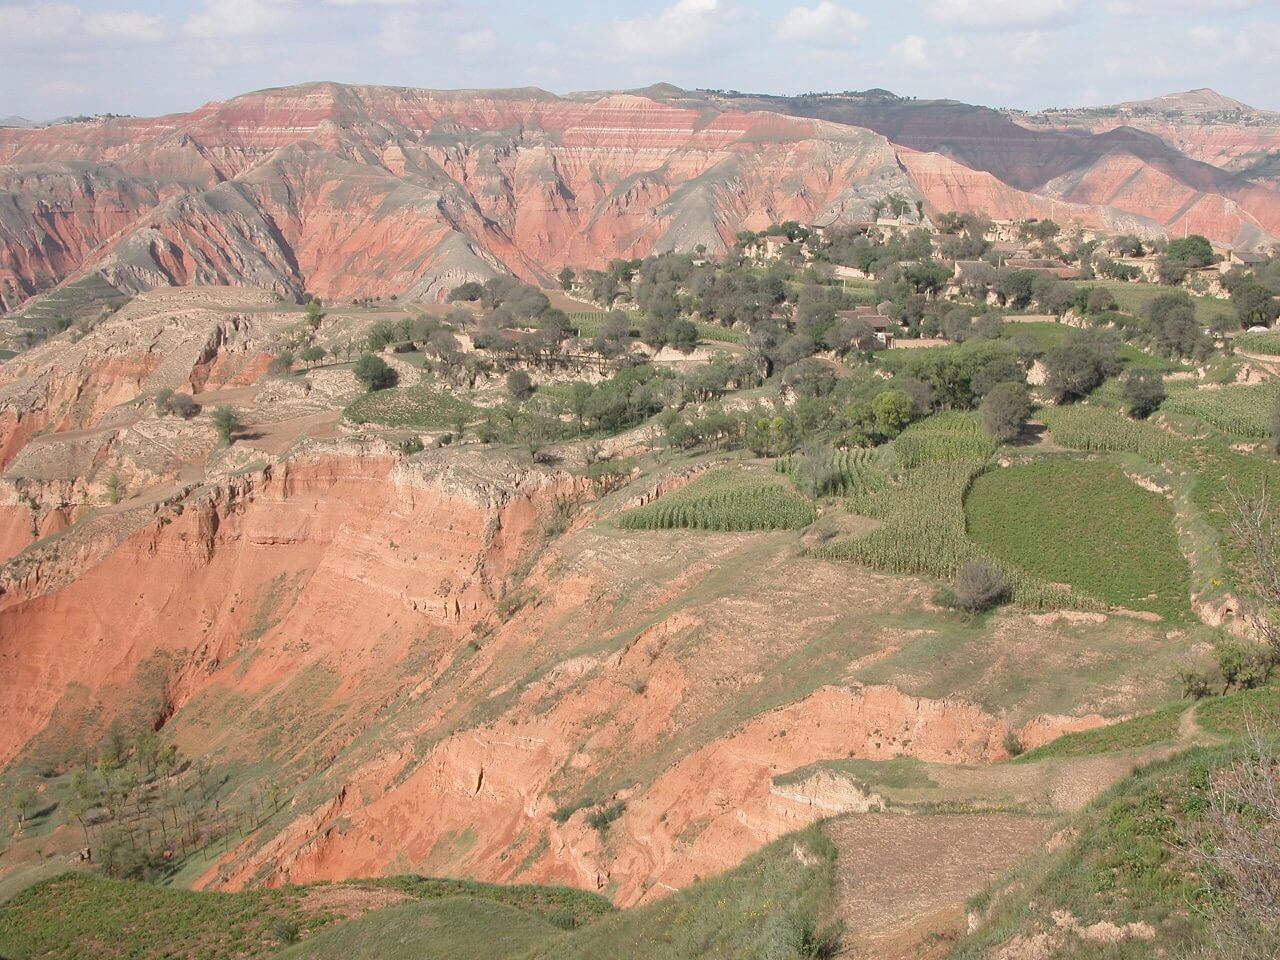 Orange hills with green trees on the left